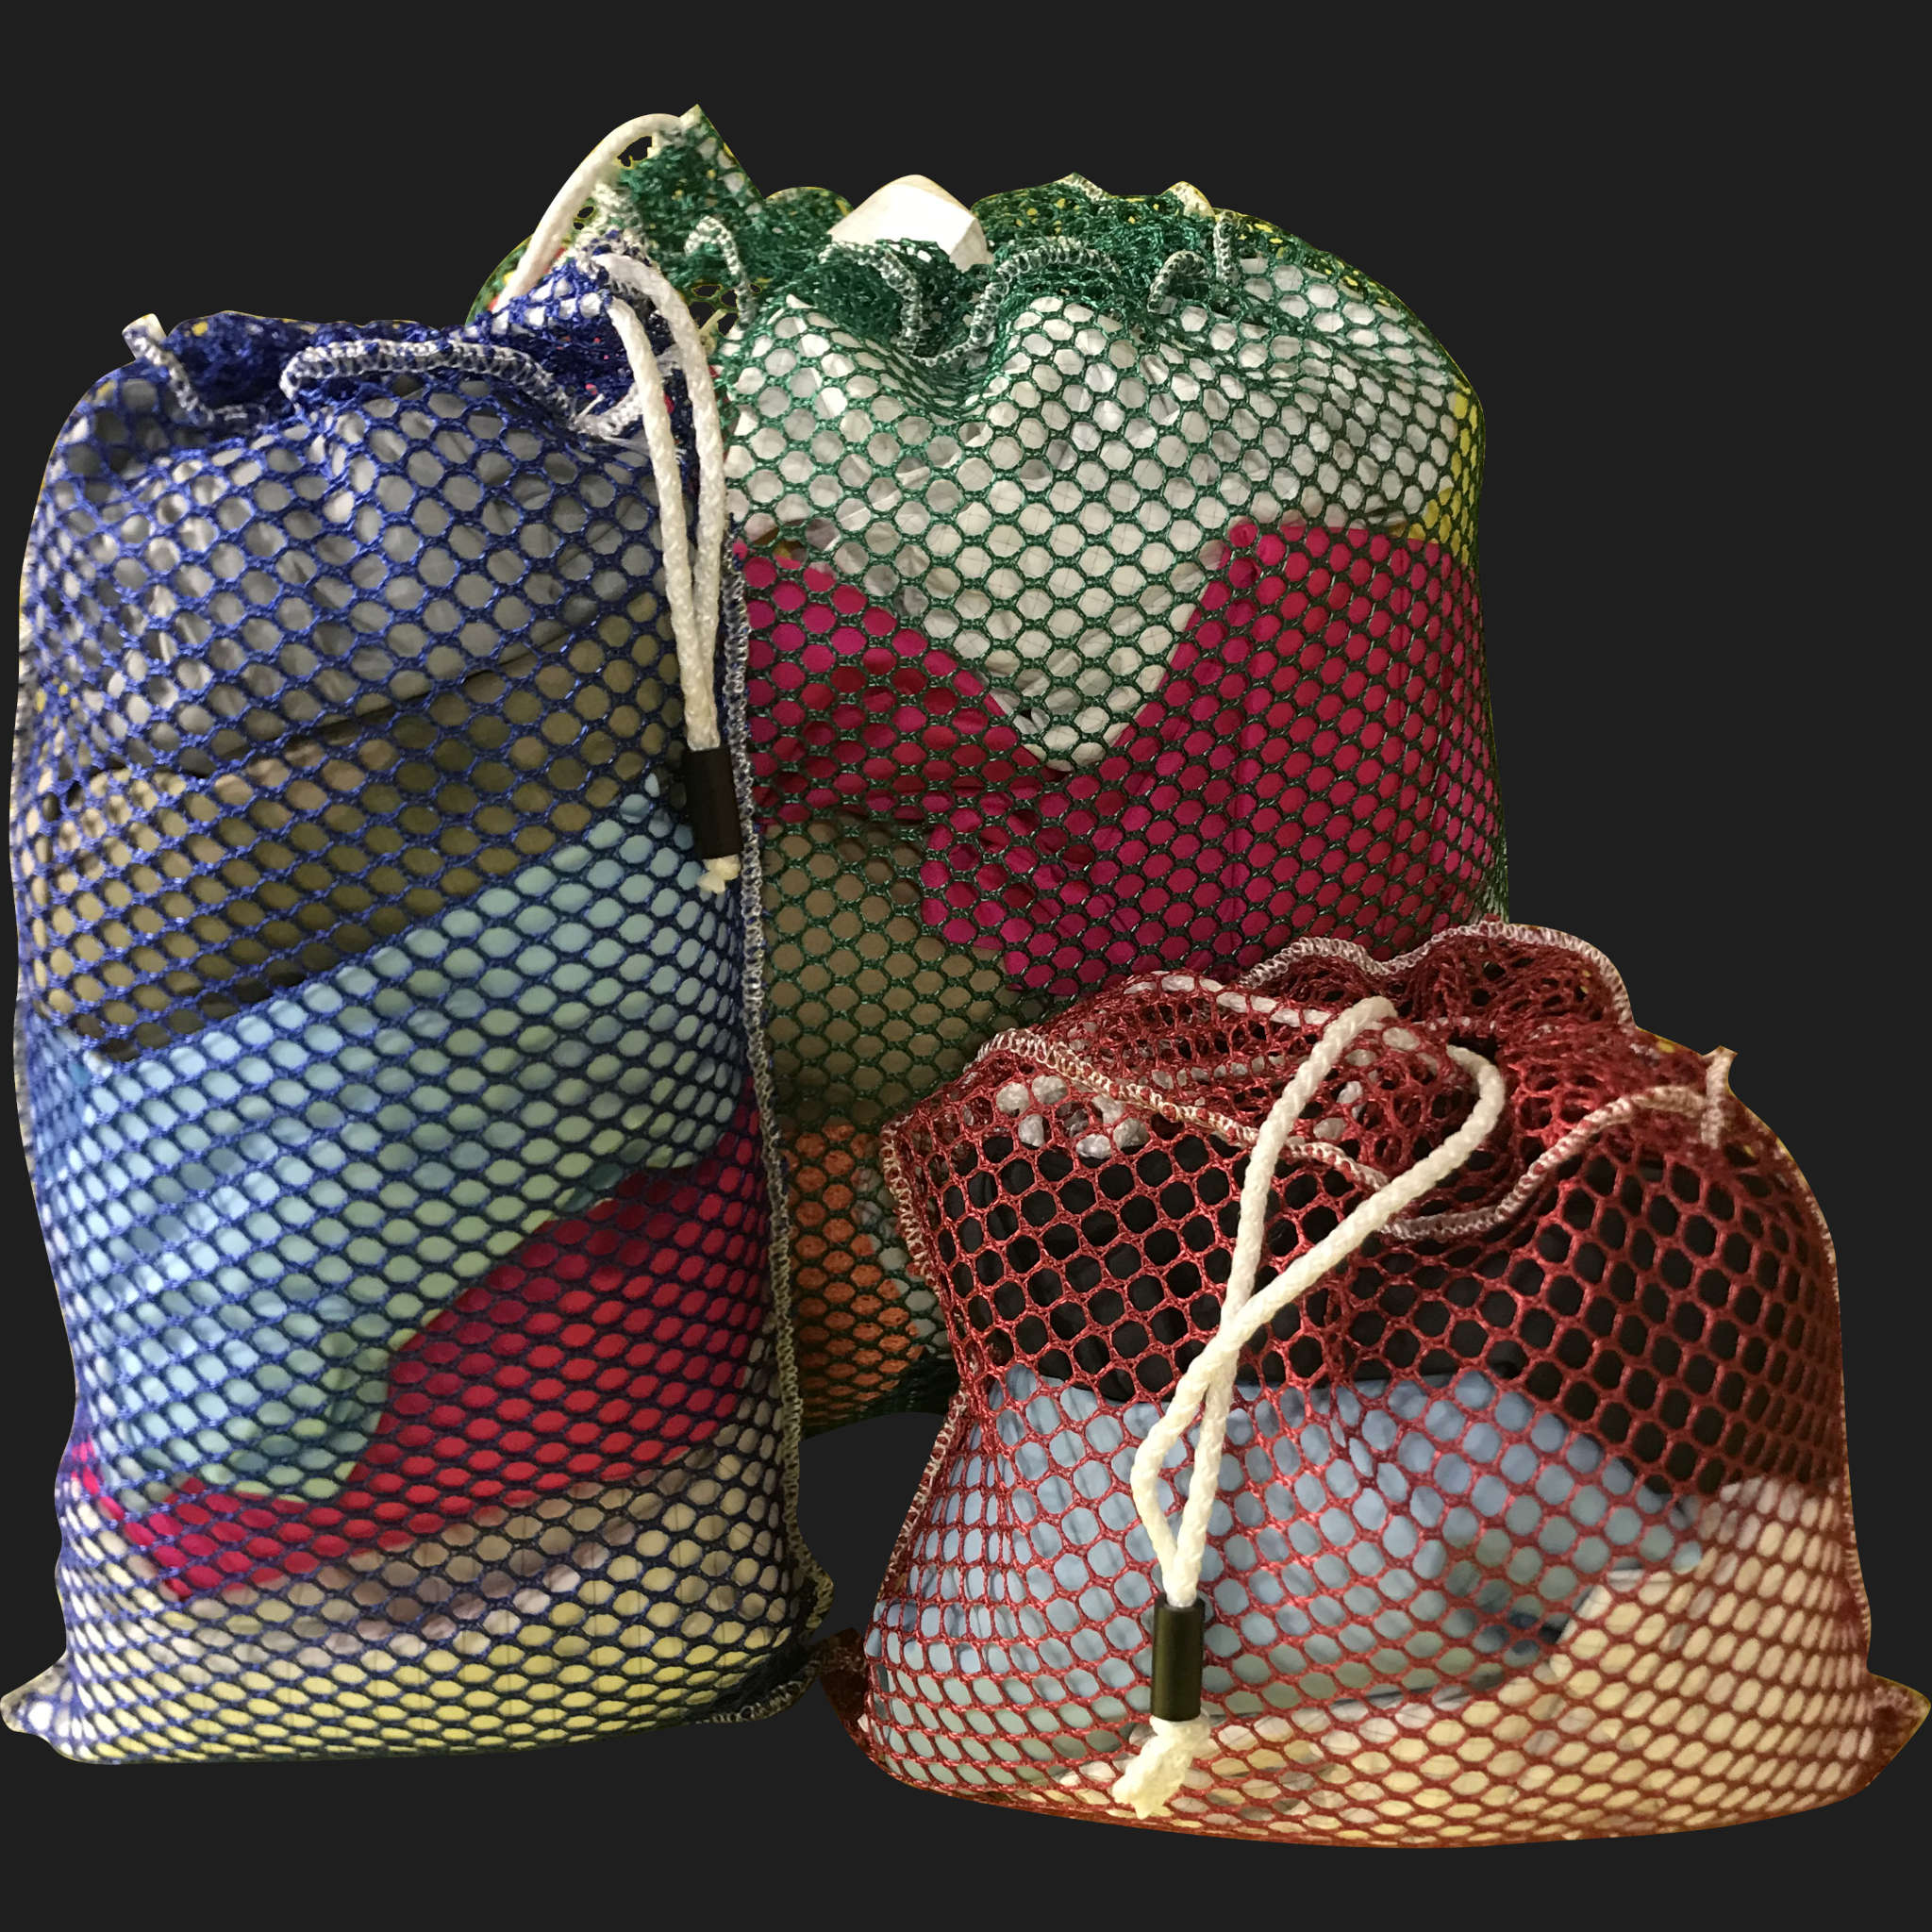 16" x 40" Customized Mesh-Net-Laundry Bags Heavy Duty with Cord and barrellock closure